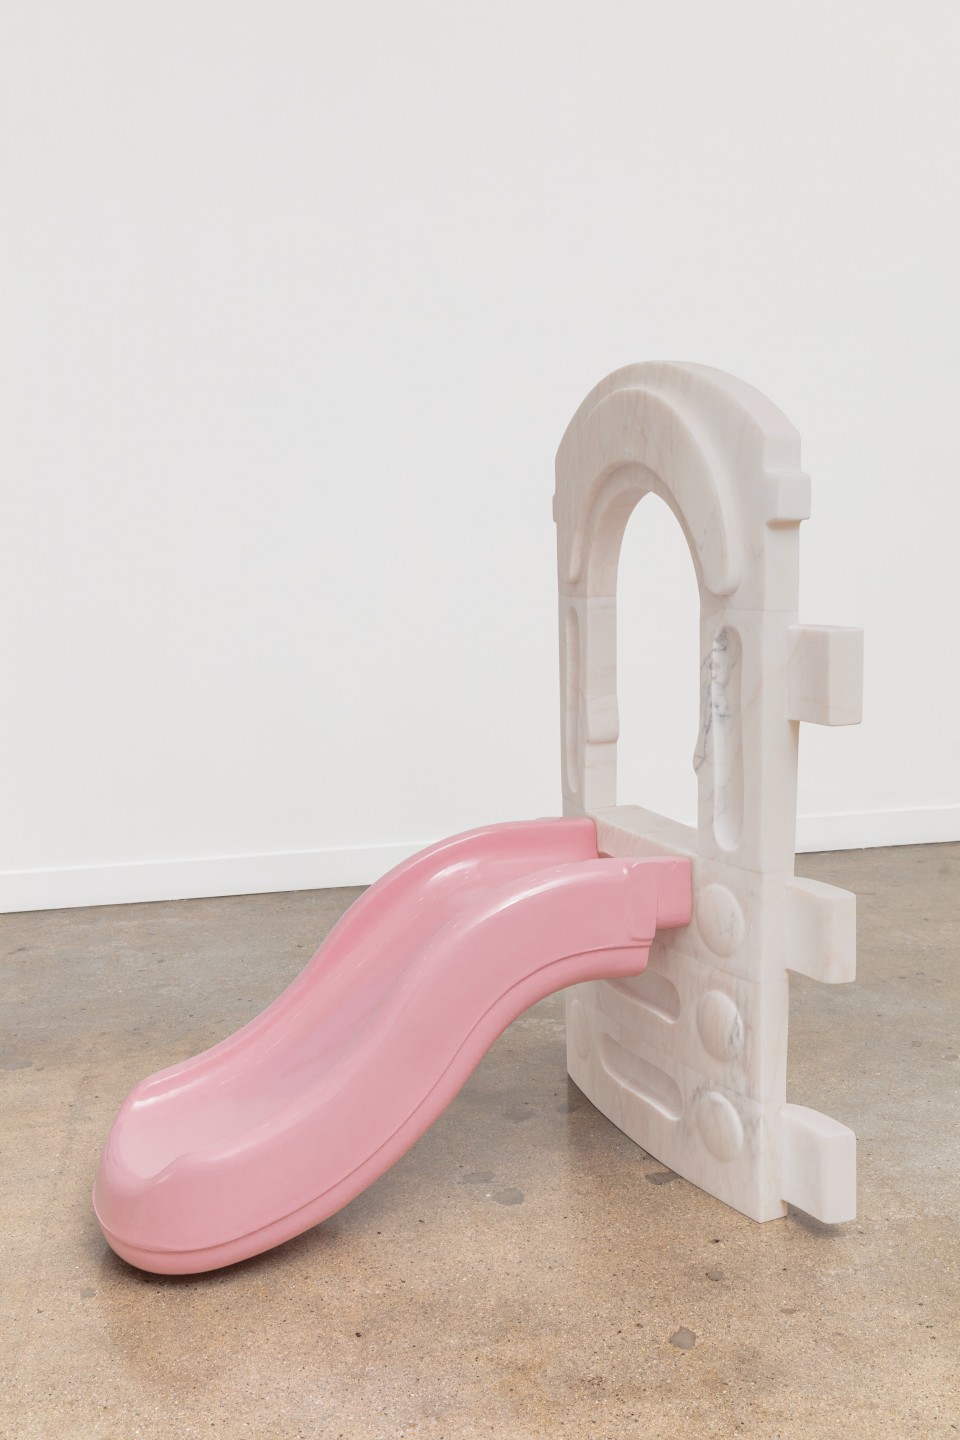 Artwork: Nevine Mahmoud  Child's play (frame), 2021  Portugese pink marble, plastic and autobody paint  54 x 30 x 44 inches (137.2 x 76.2 x 111.8 cm)